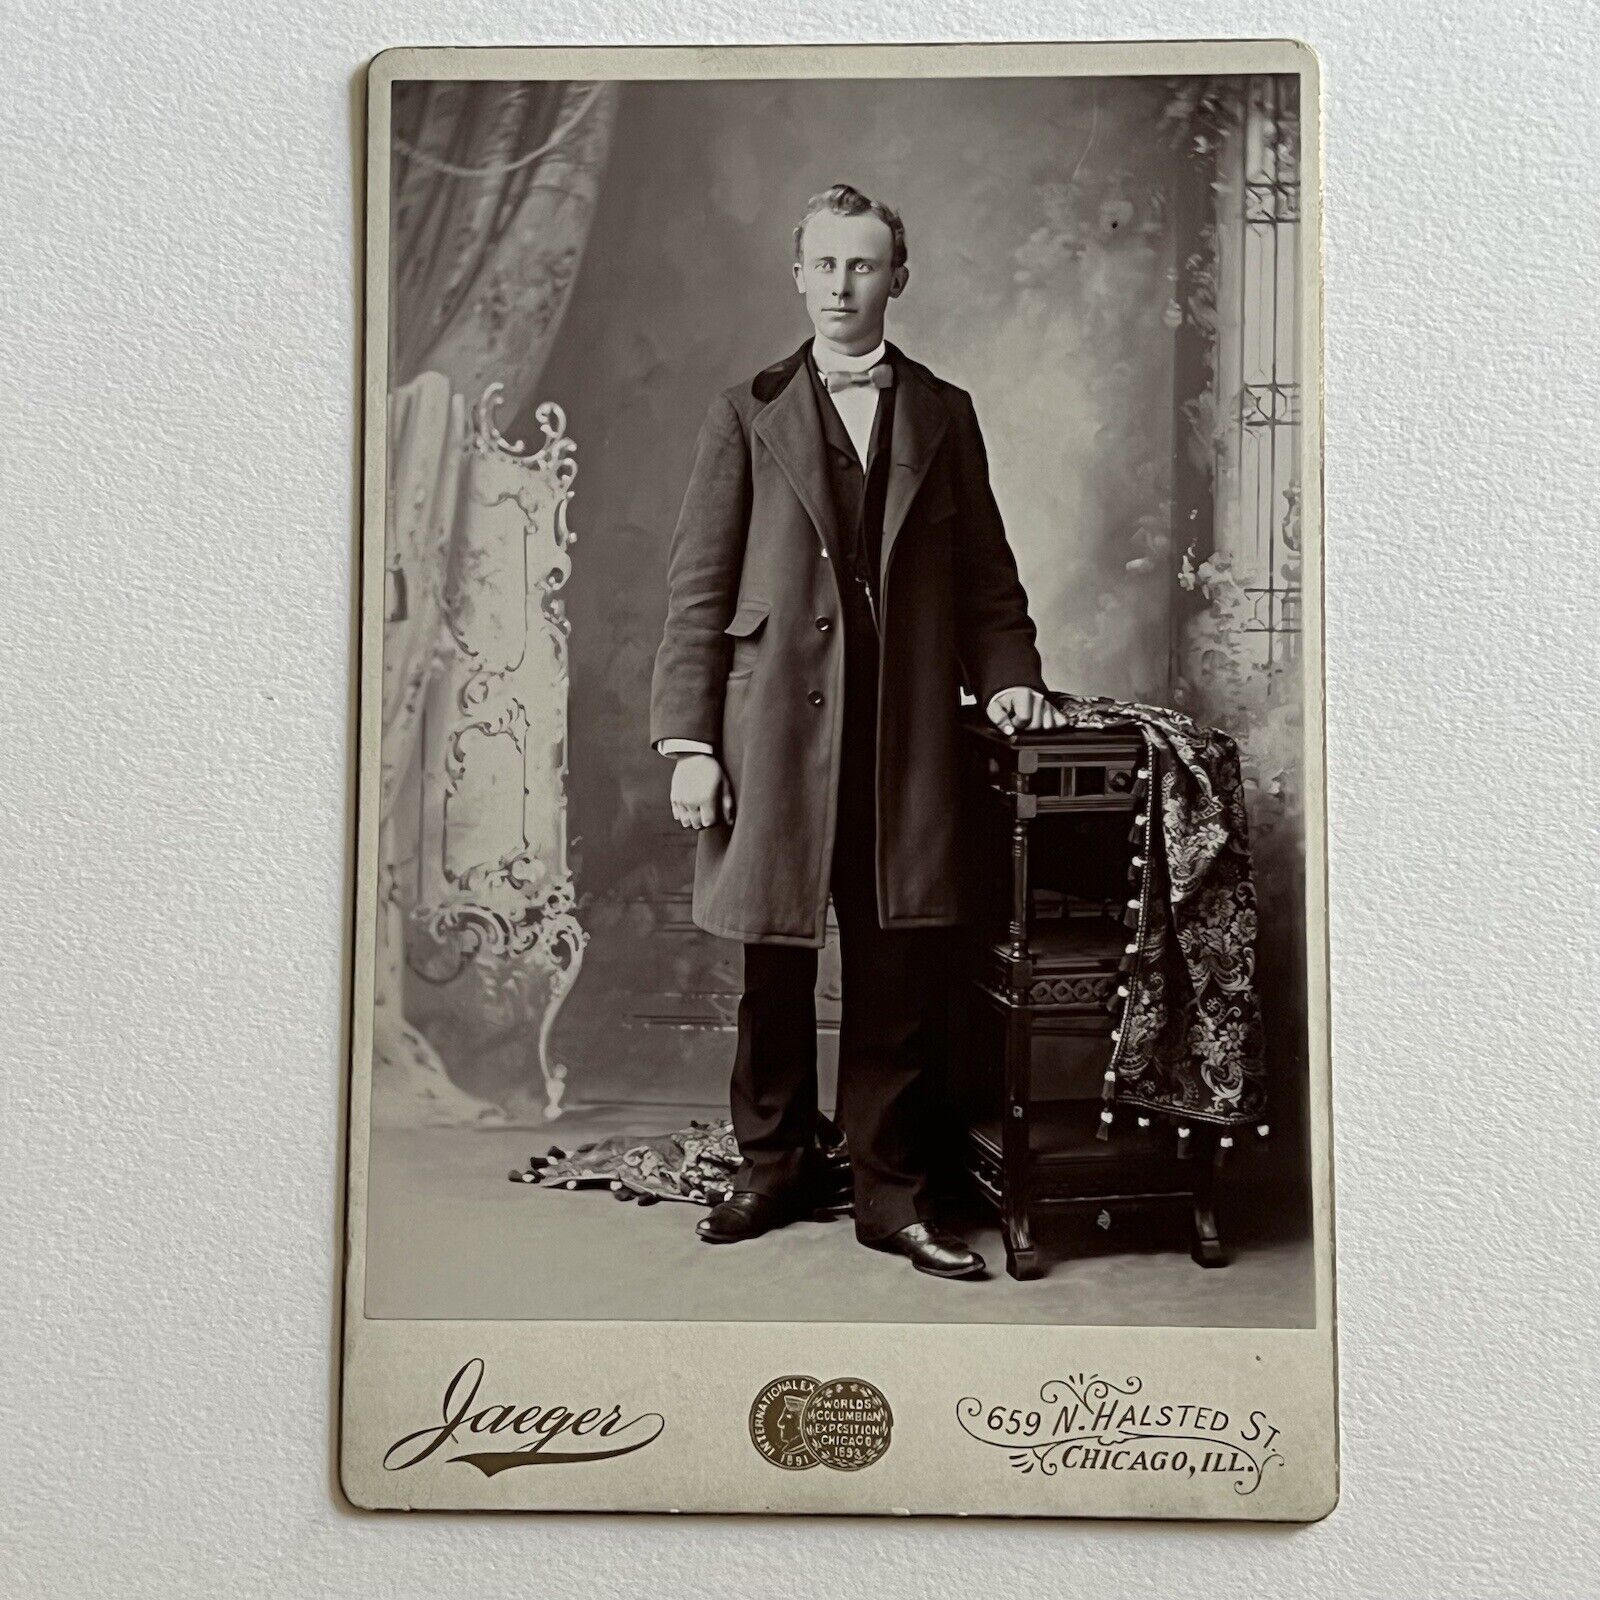 Antique Cabinet Card Photograph Handsome Dapper Young Man Expo 1893 Chicago IL